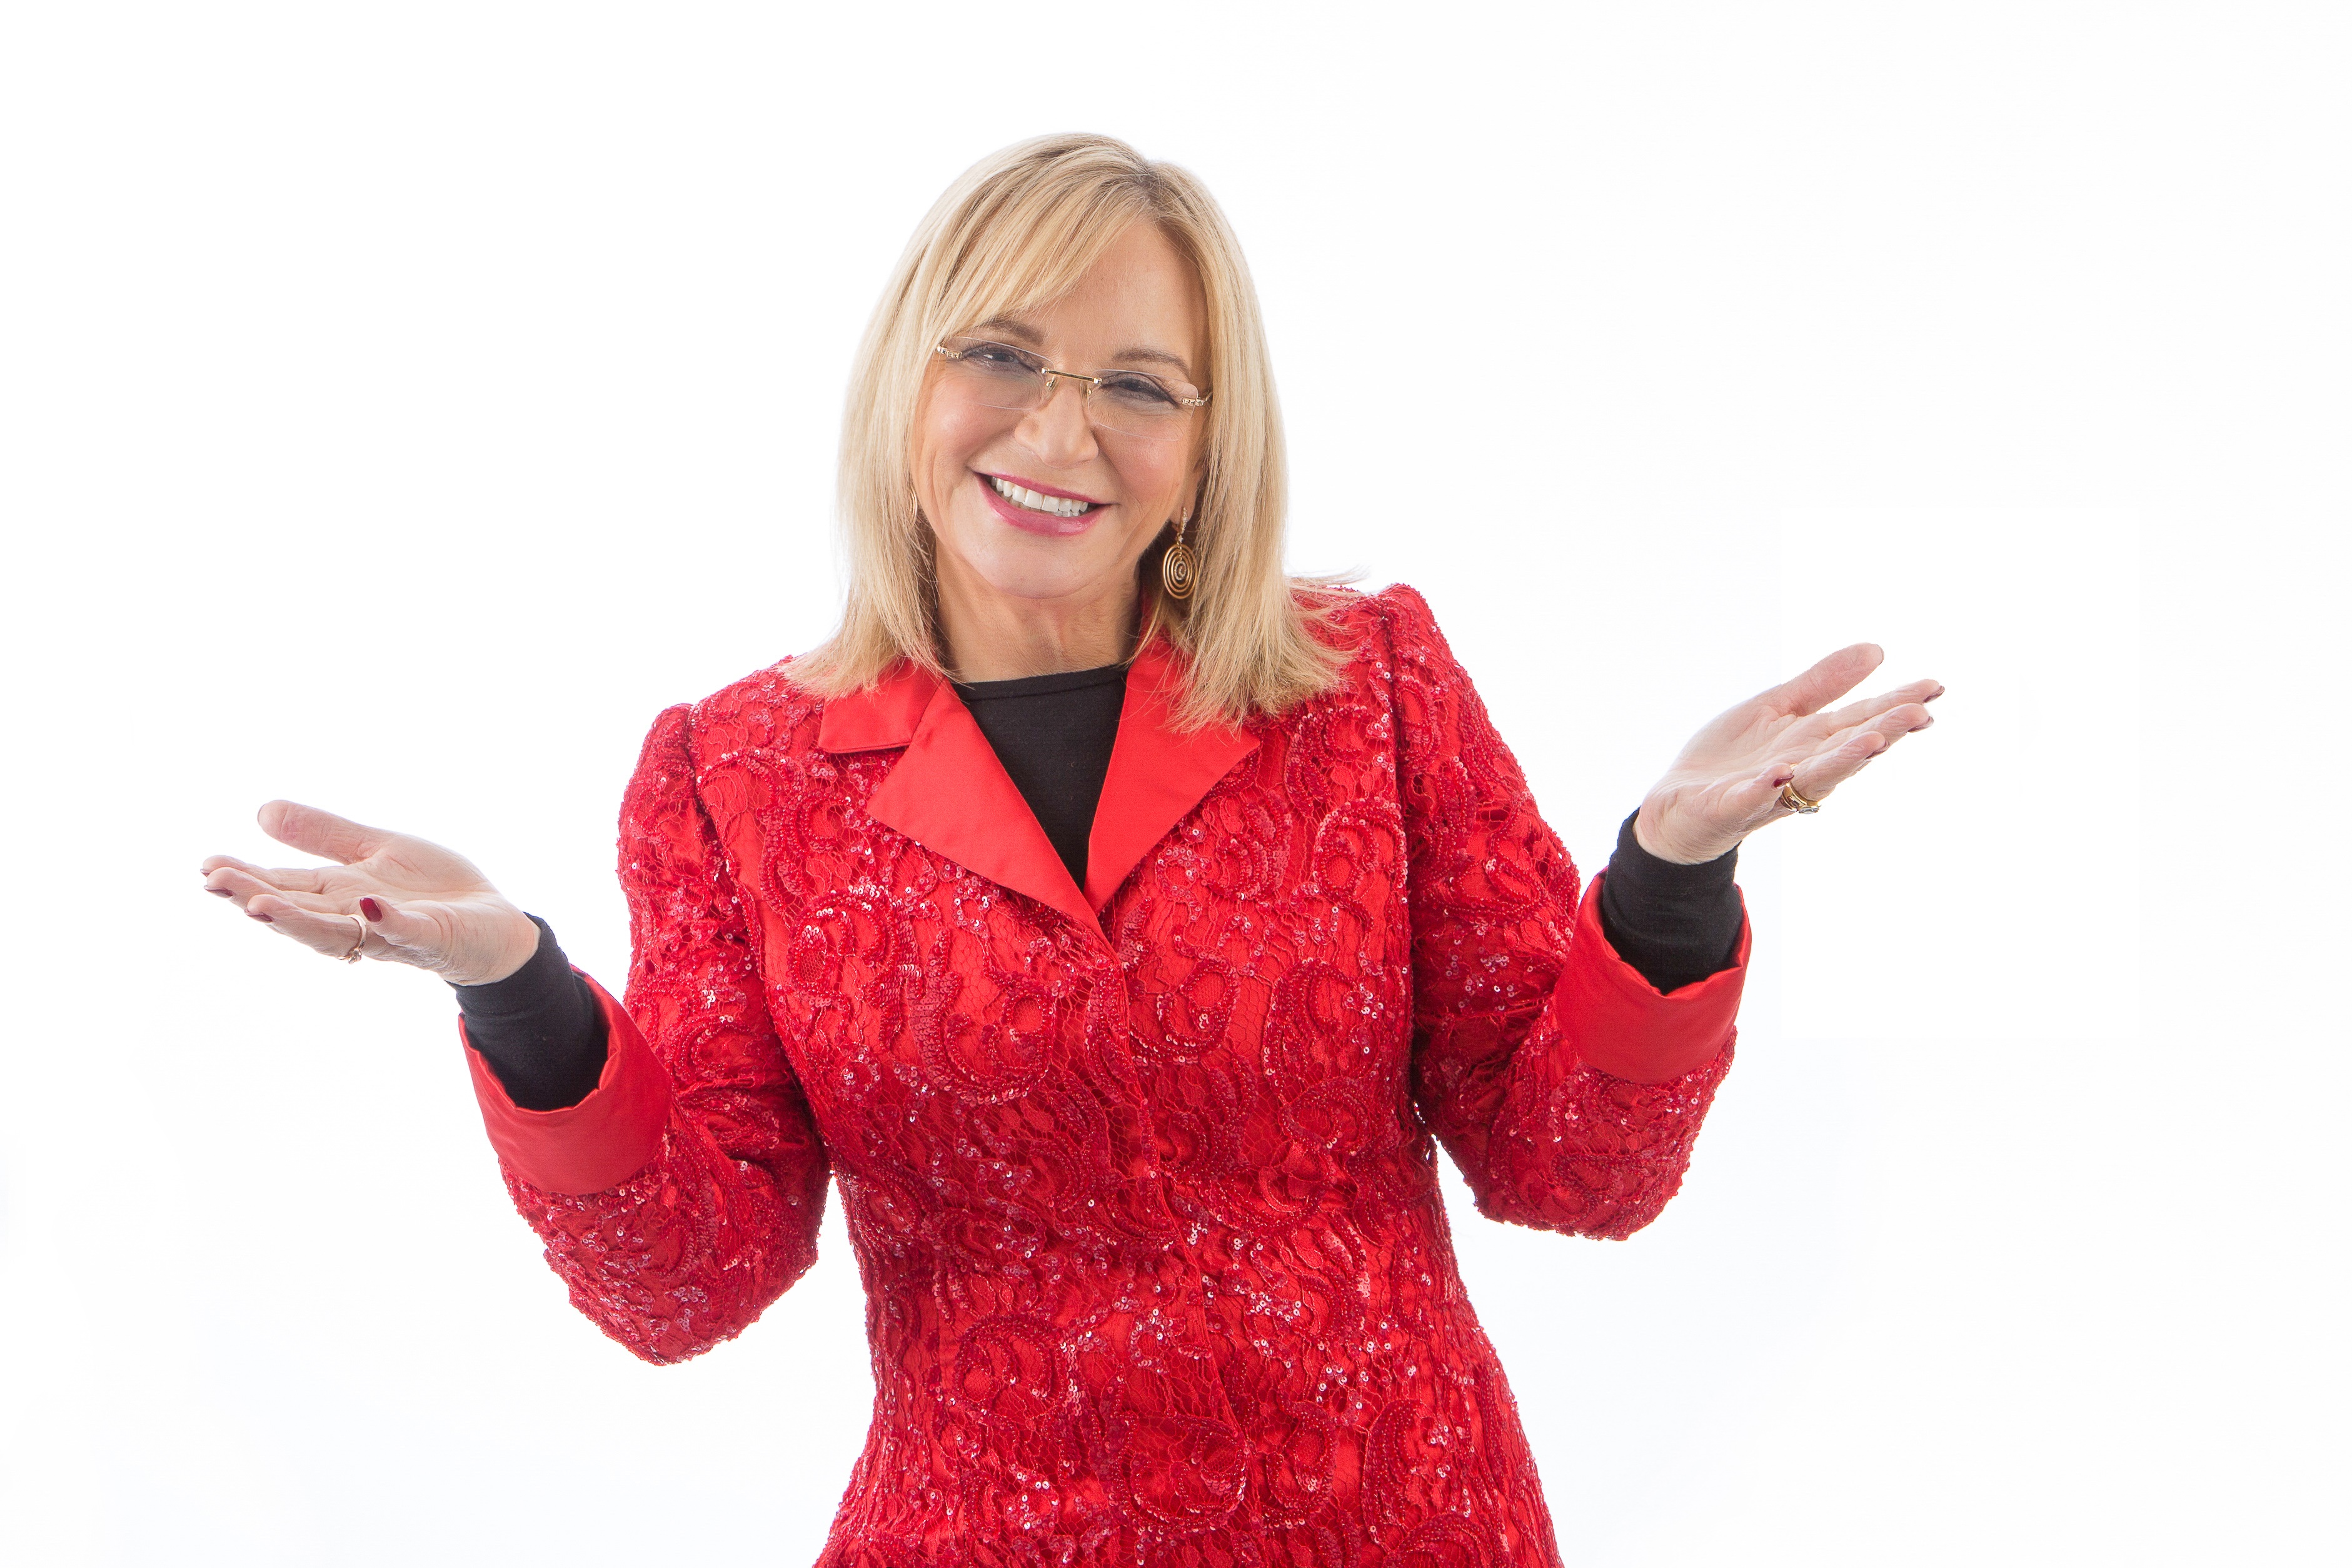 Big Brother psychic Sally Morgan predicting sell-out in Runcorn